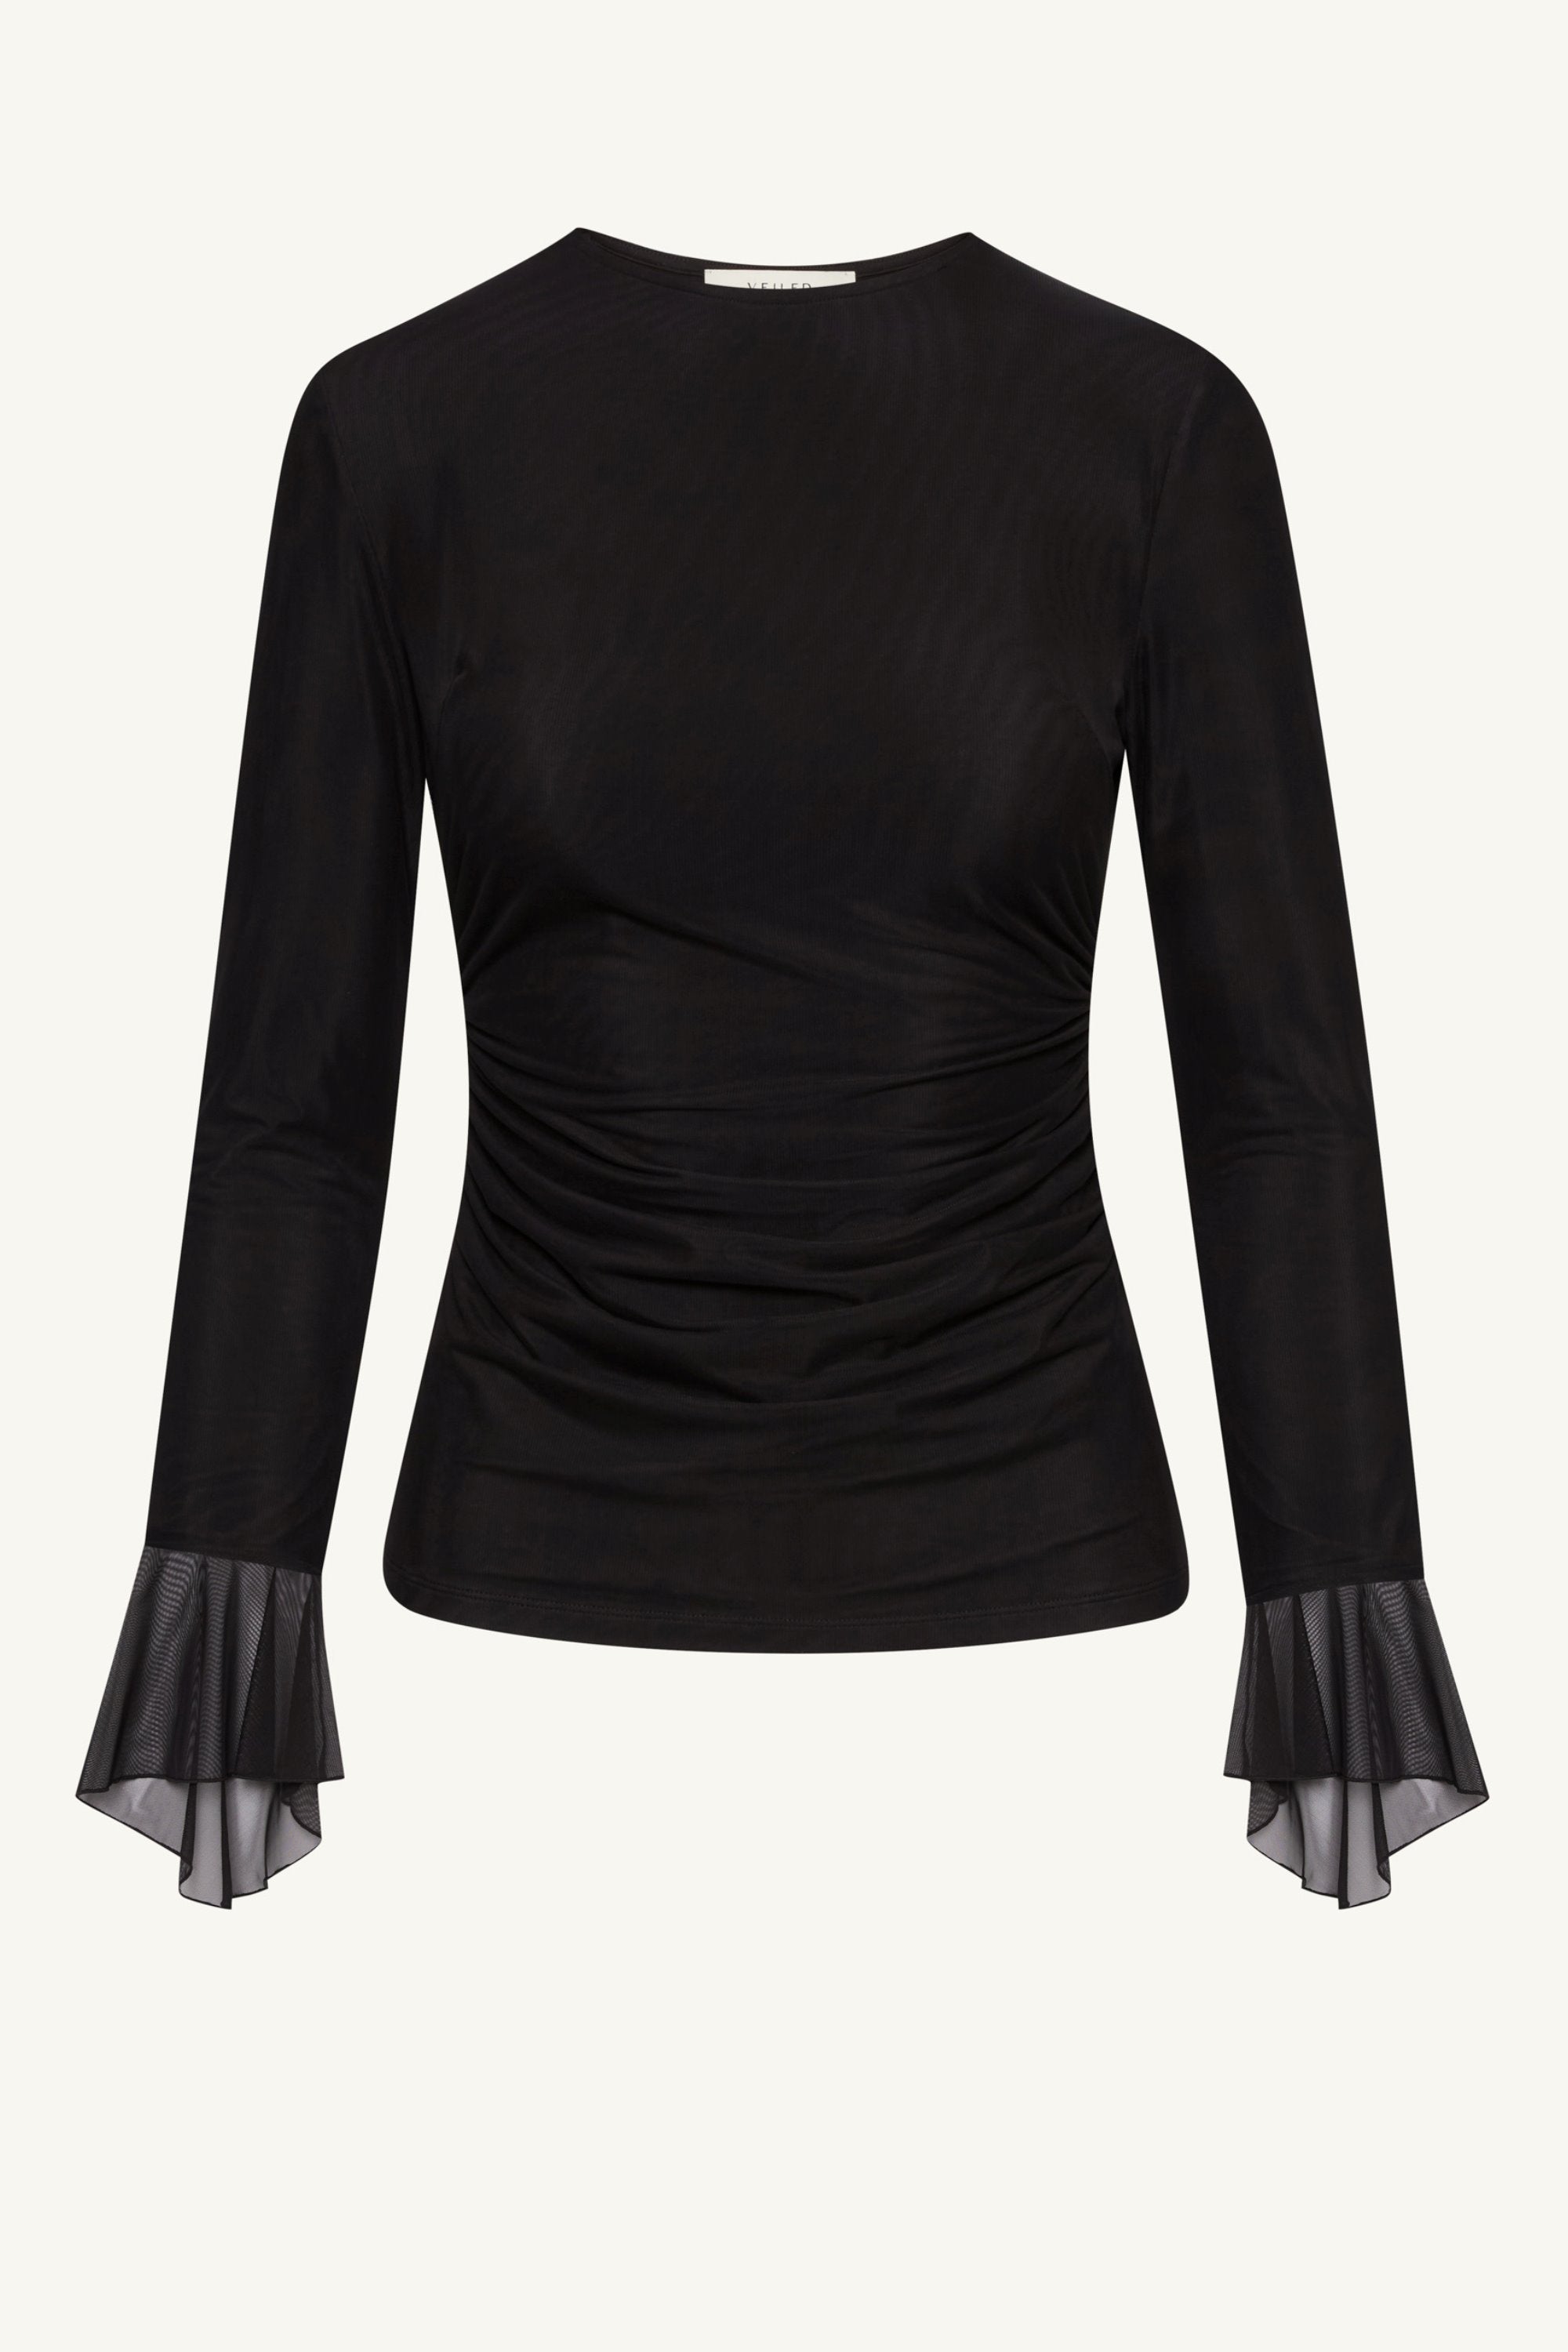 Lolita Rouched Mesh Top - Black Clothing Veiled 